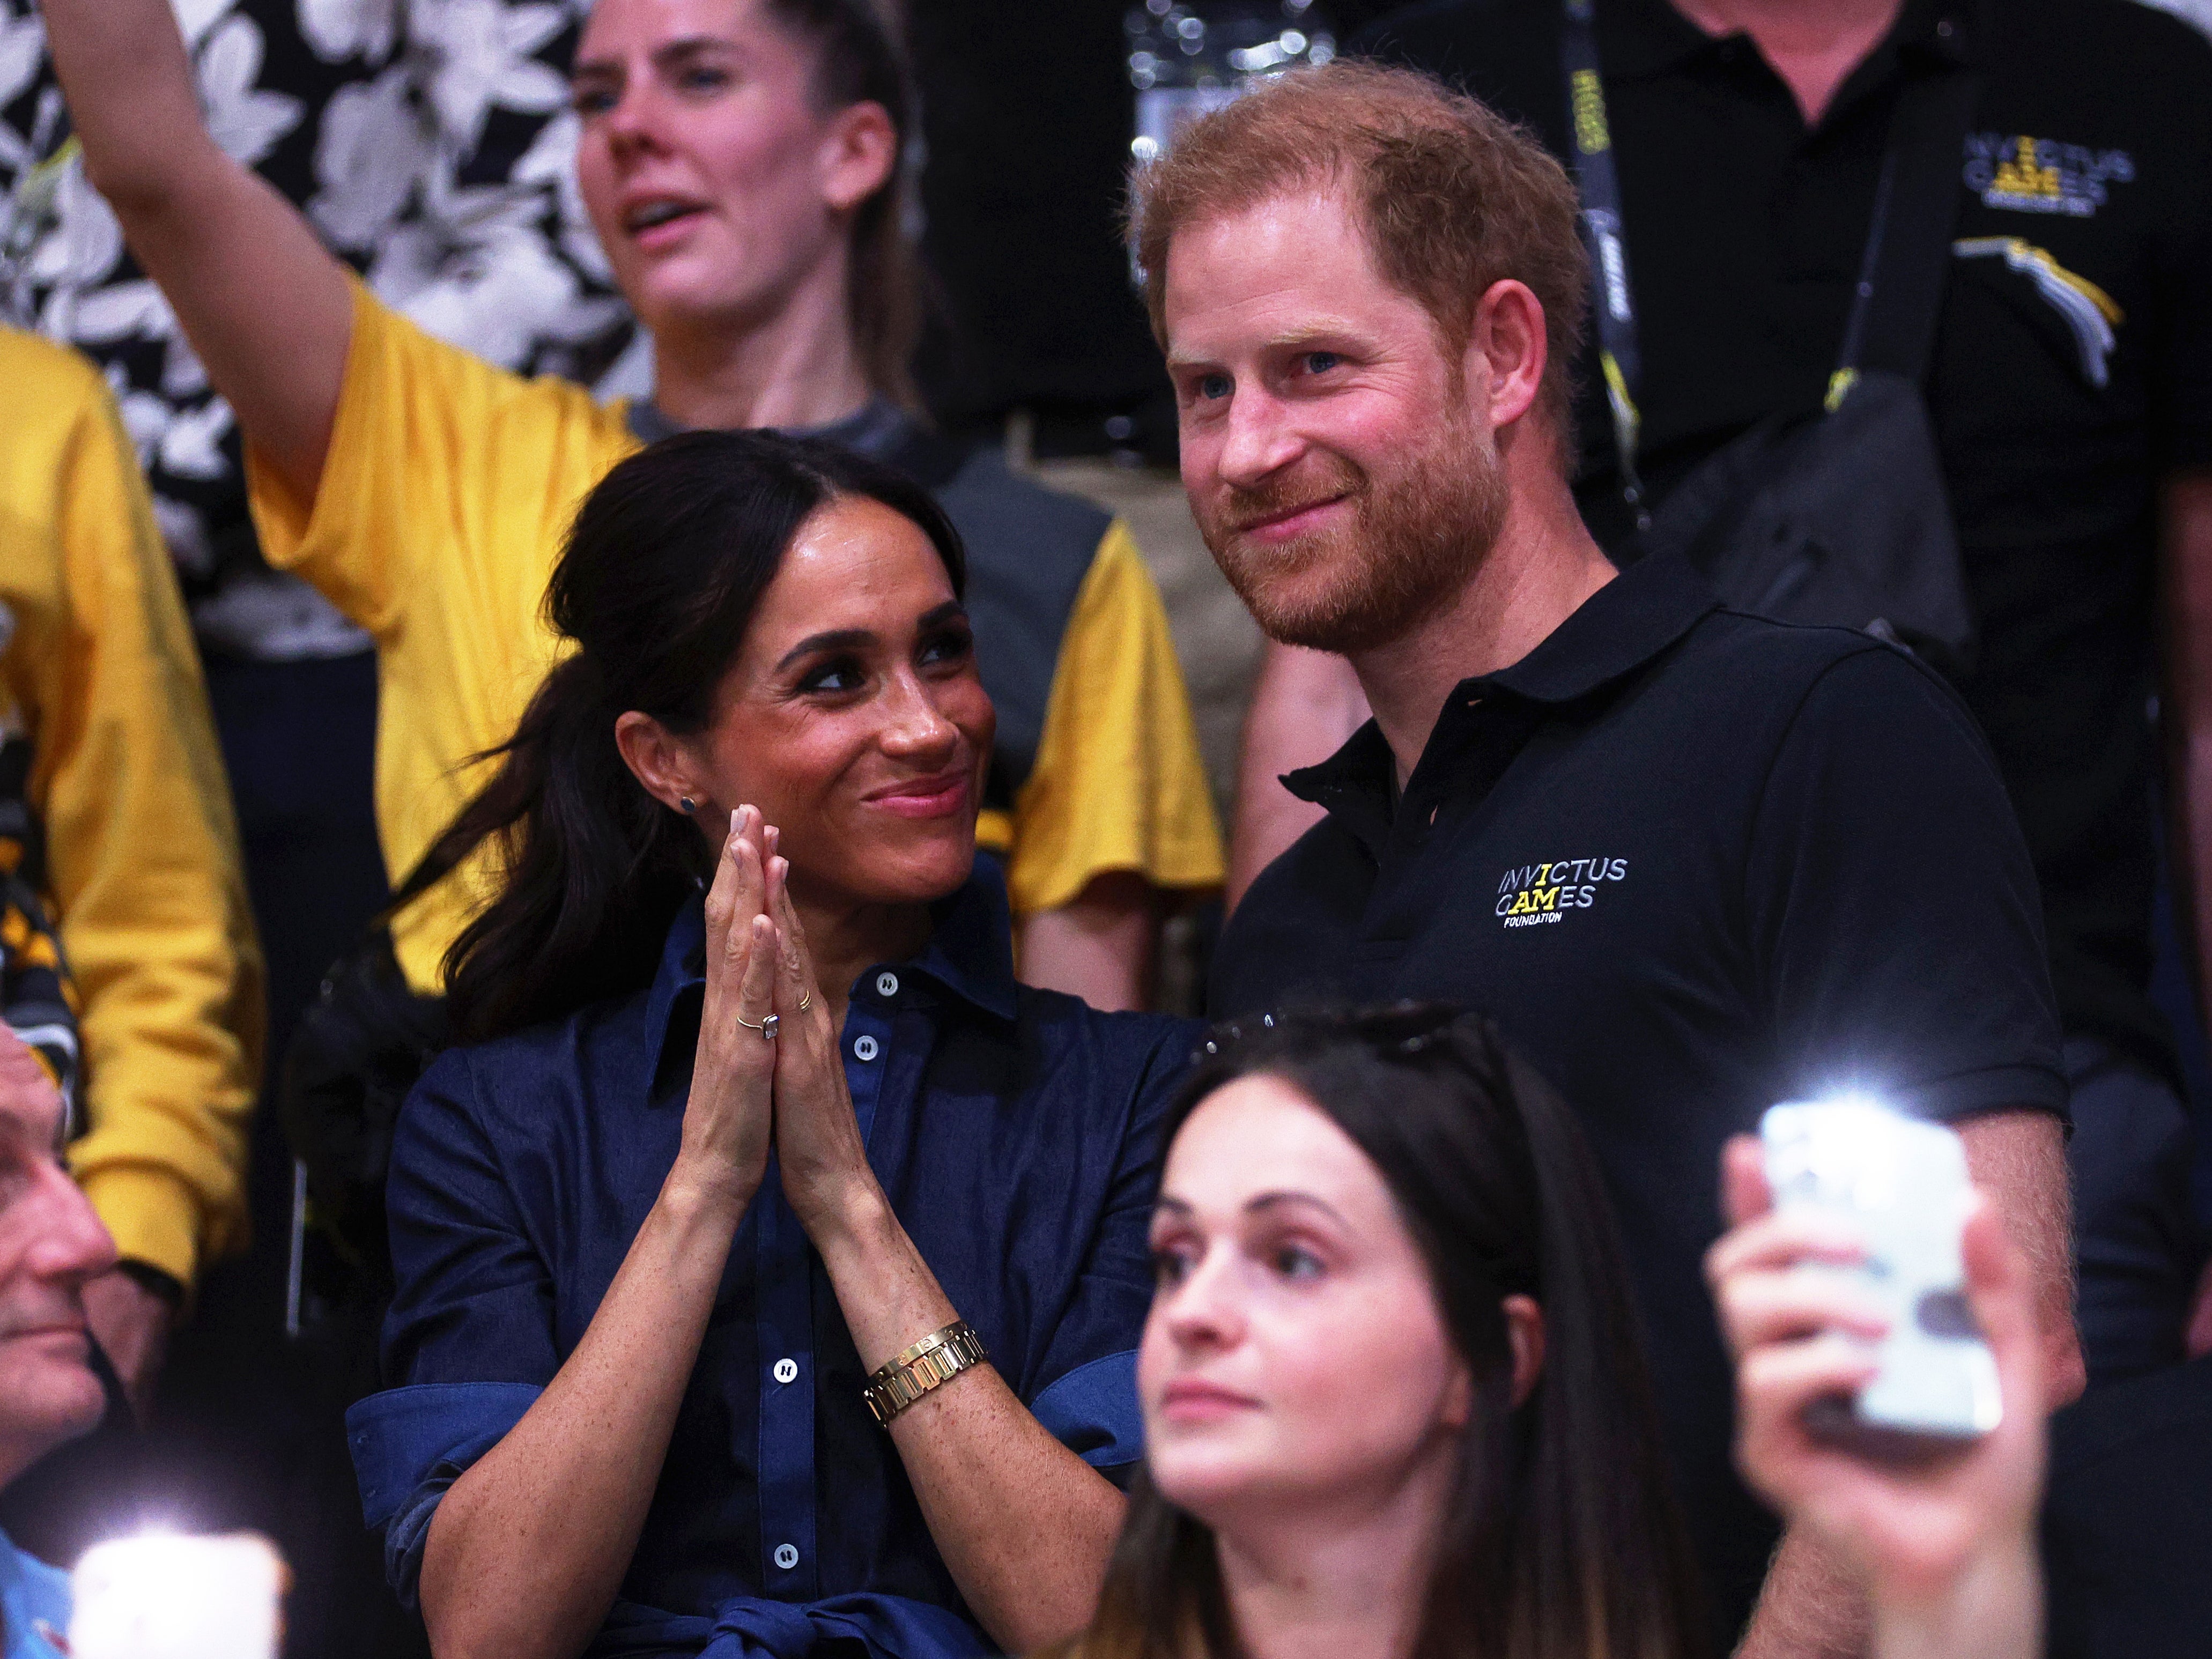 Meghan and Harry at the Invictus Games, his event for injured veterans